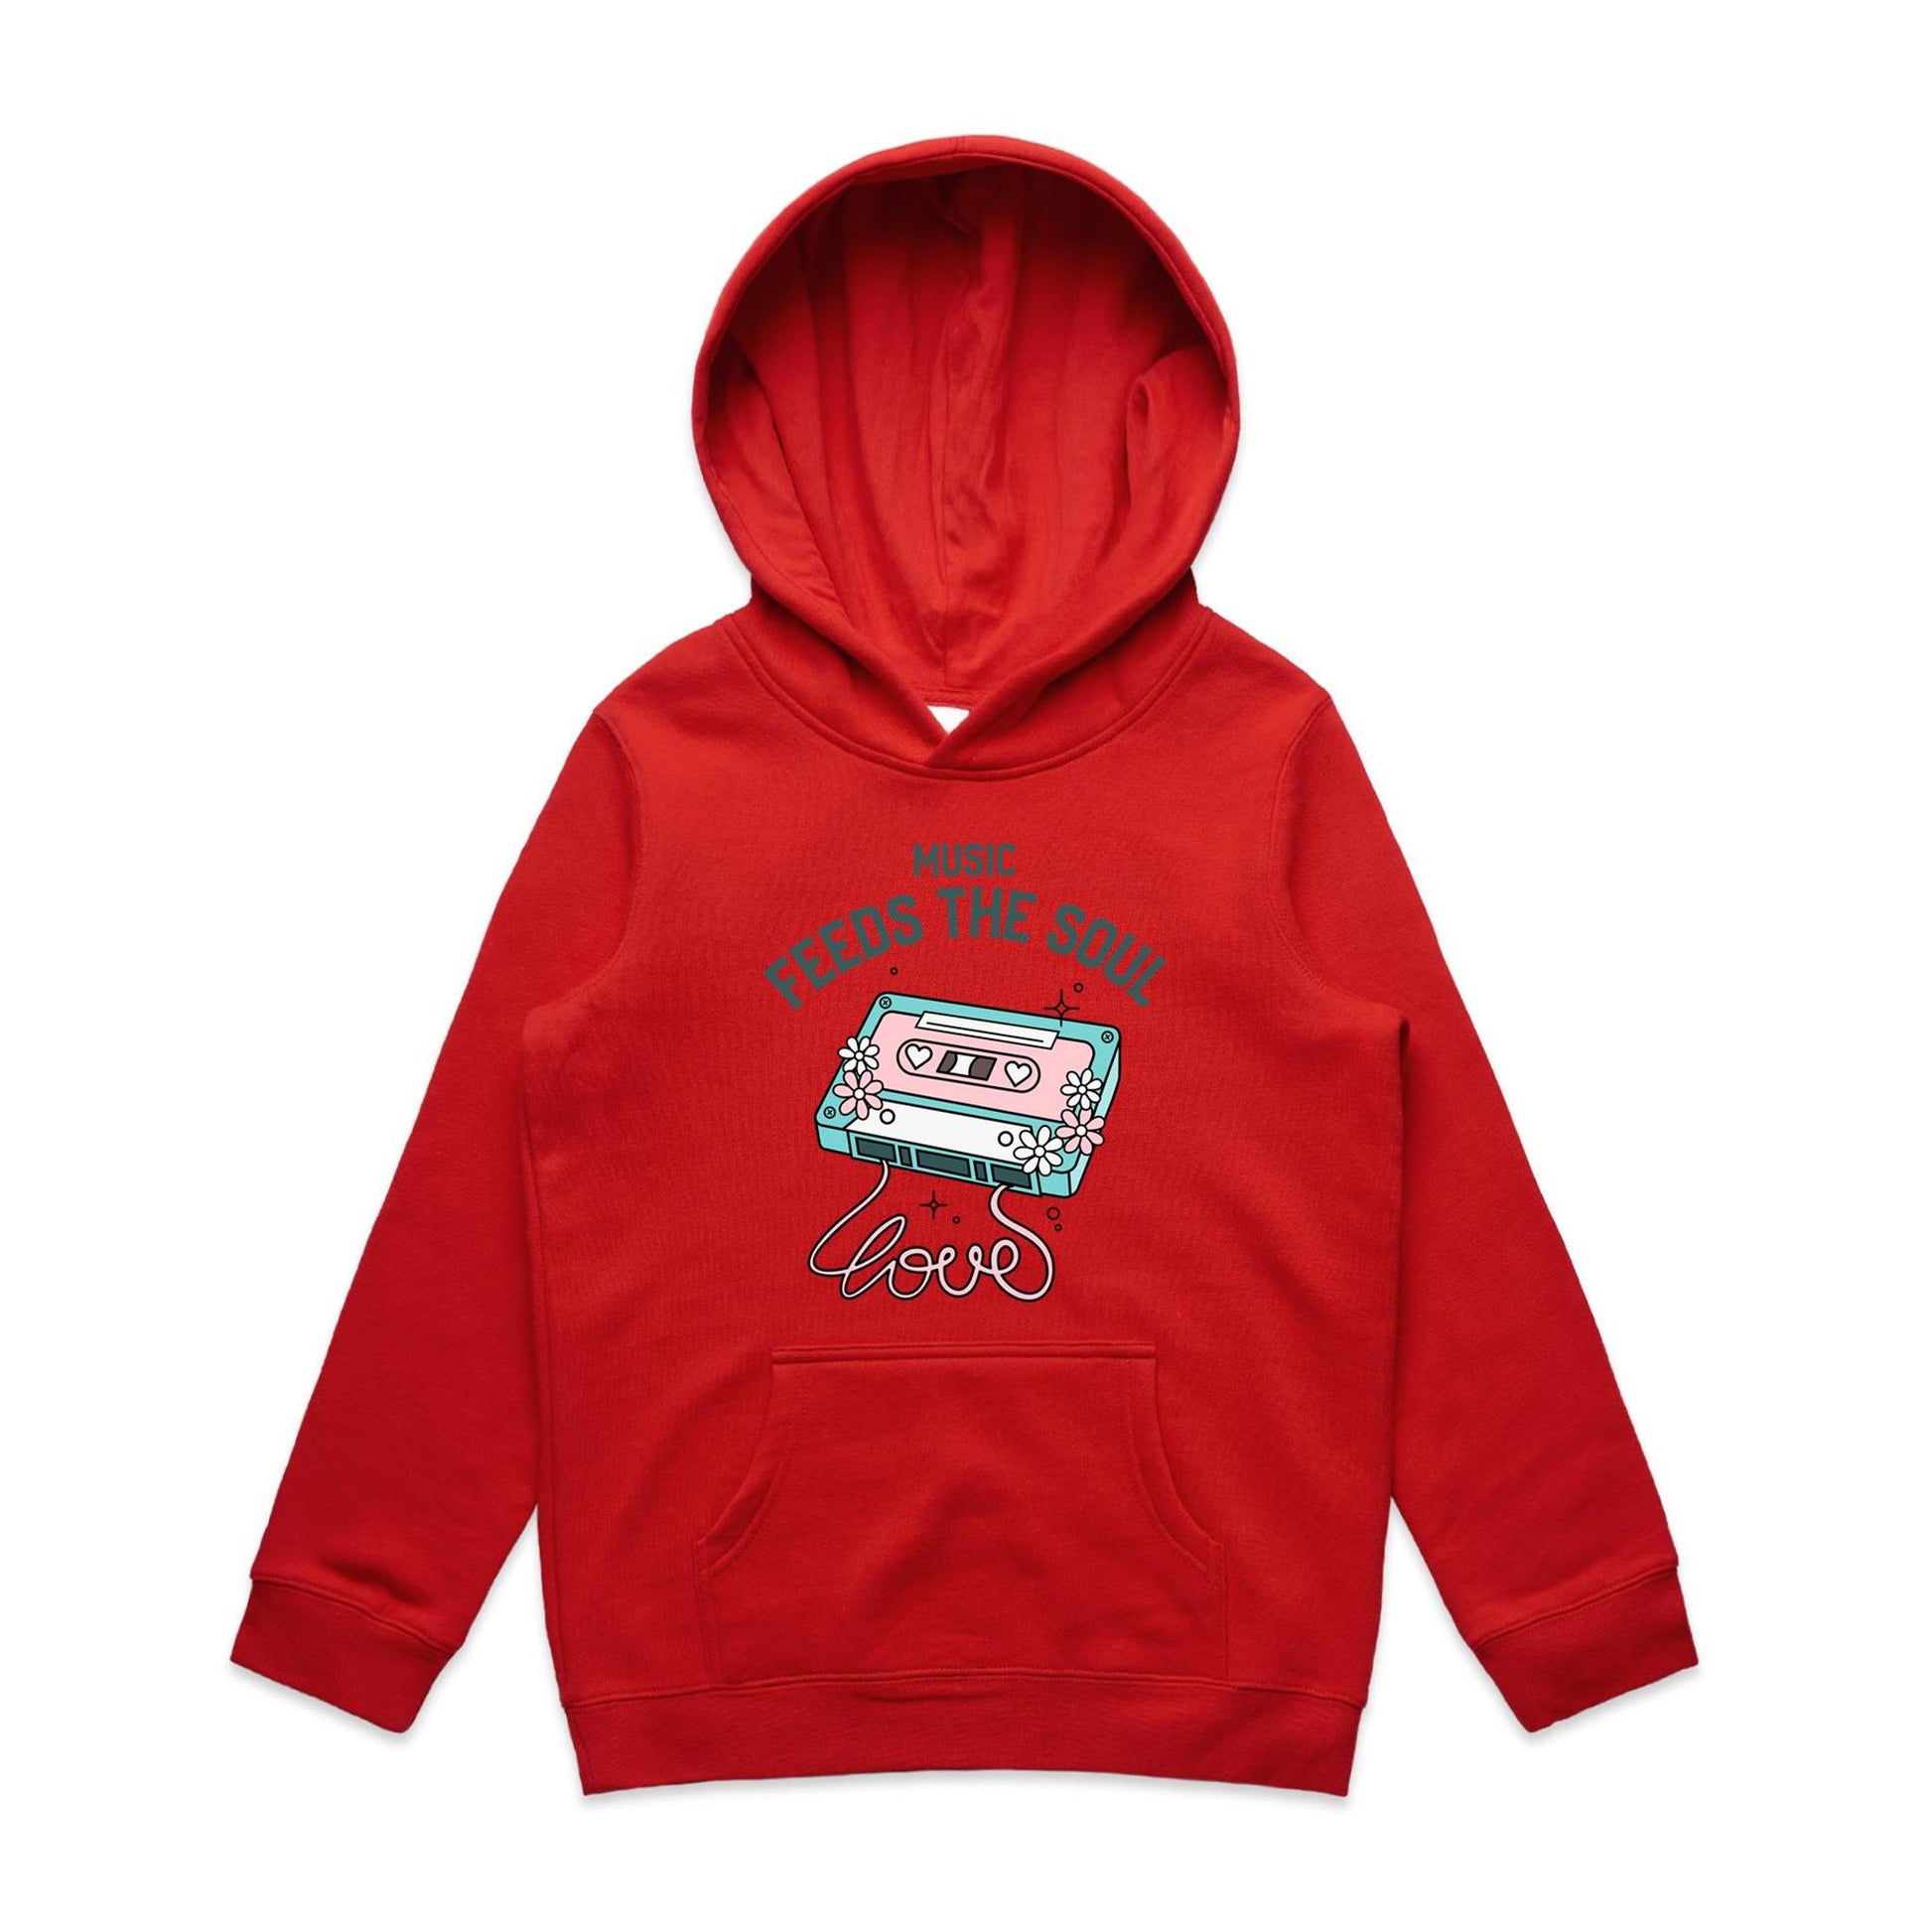 Music Feeds The Soul - Youth Supply Hood Red Kids Hoodie Music